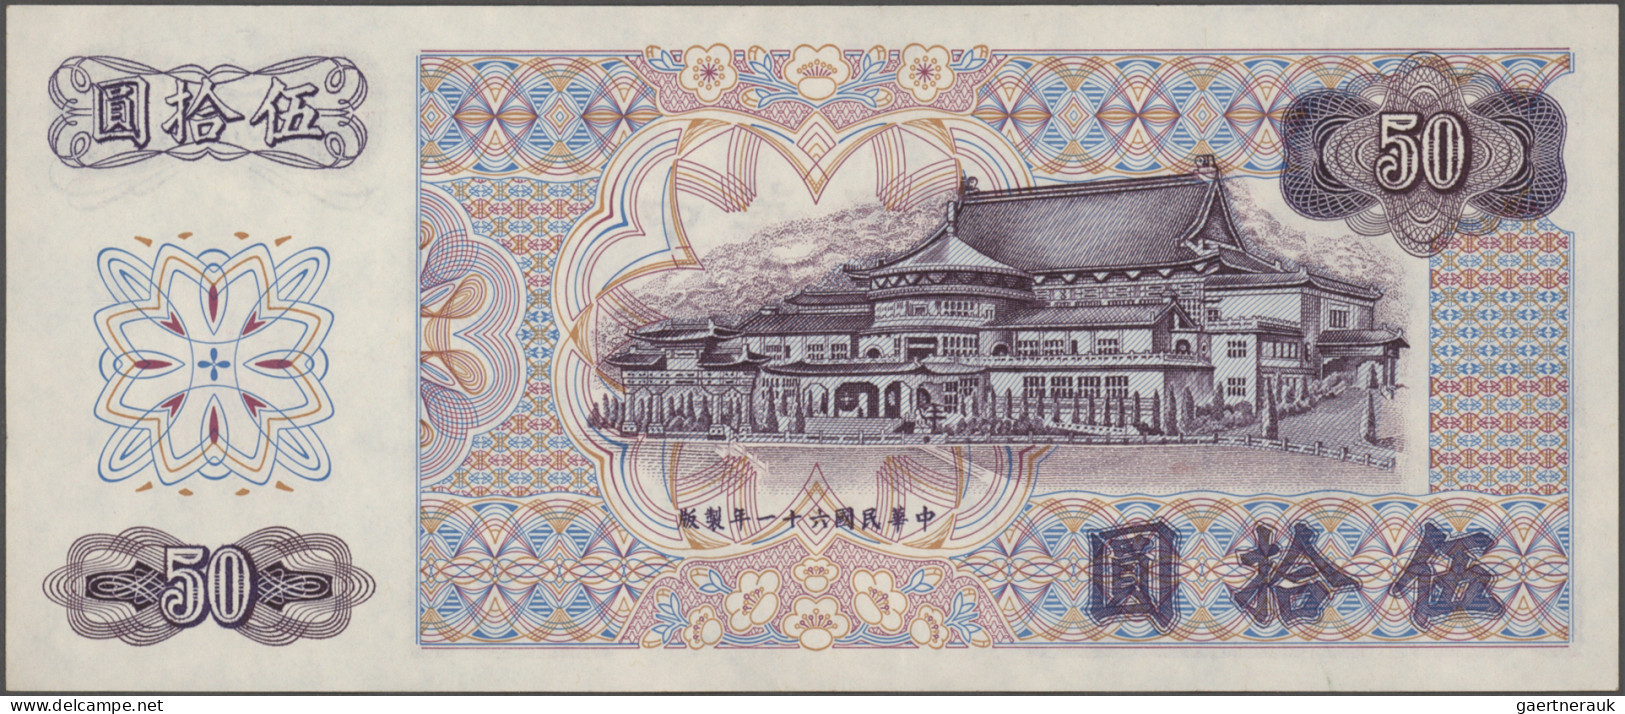 Taiwan: China – Bank of Taiwan, set with 9 banknotes, 1961-1999 series, with 1 Y